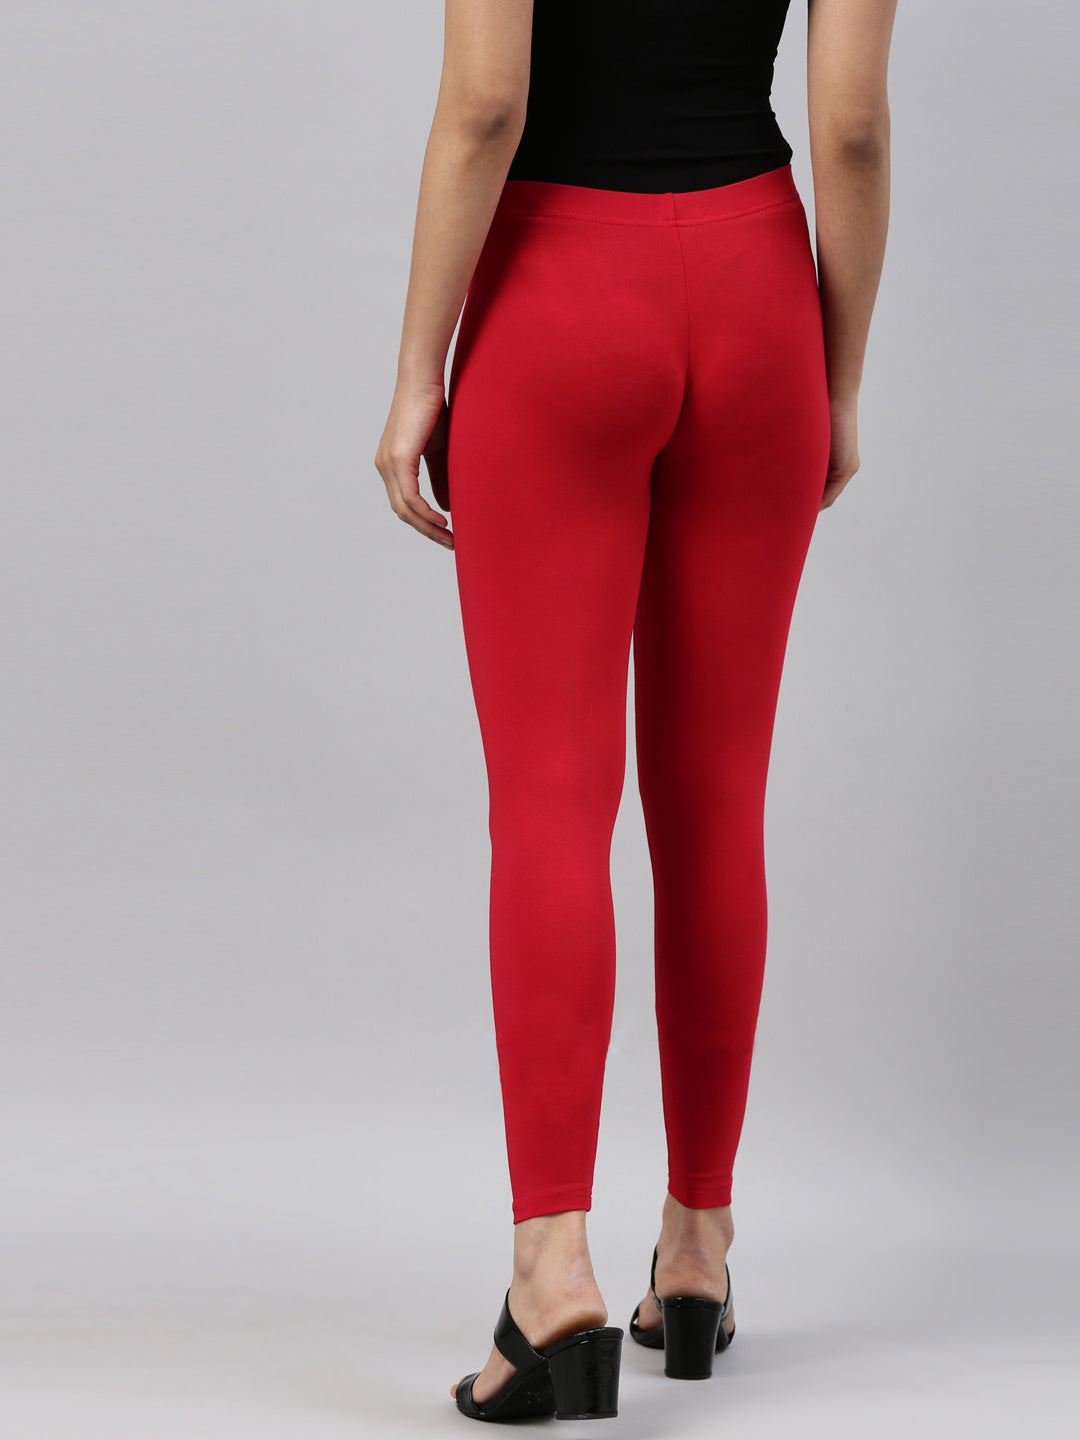 Buy Belore Slims Women Red Cotton Spandex Ankle Length Tummy